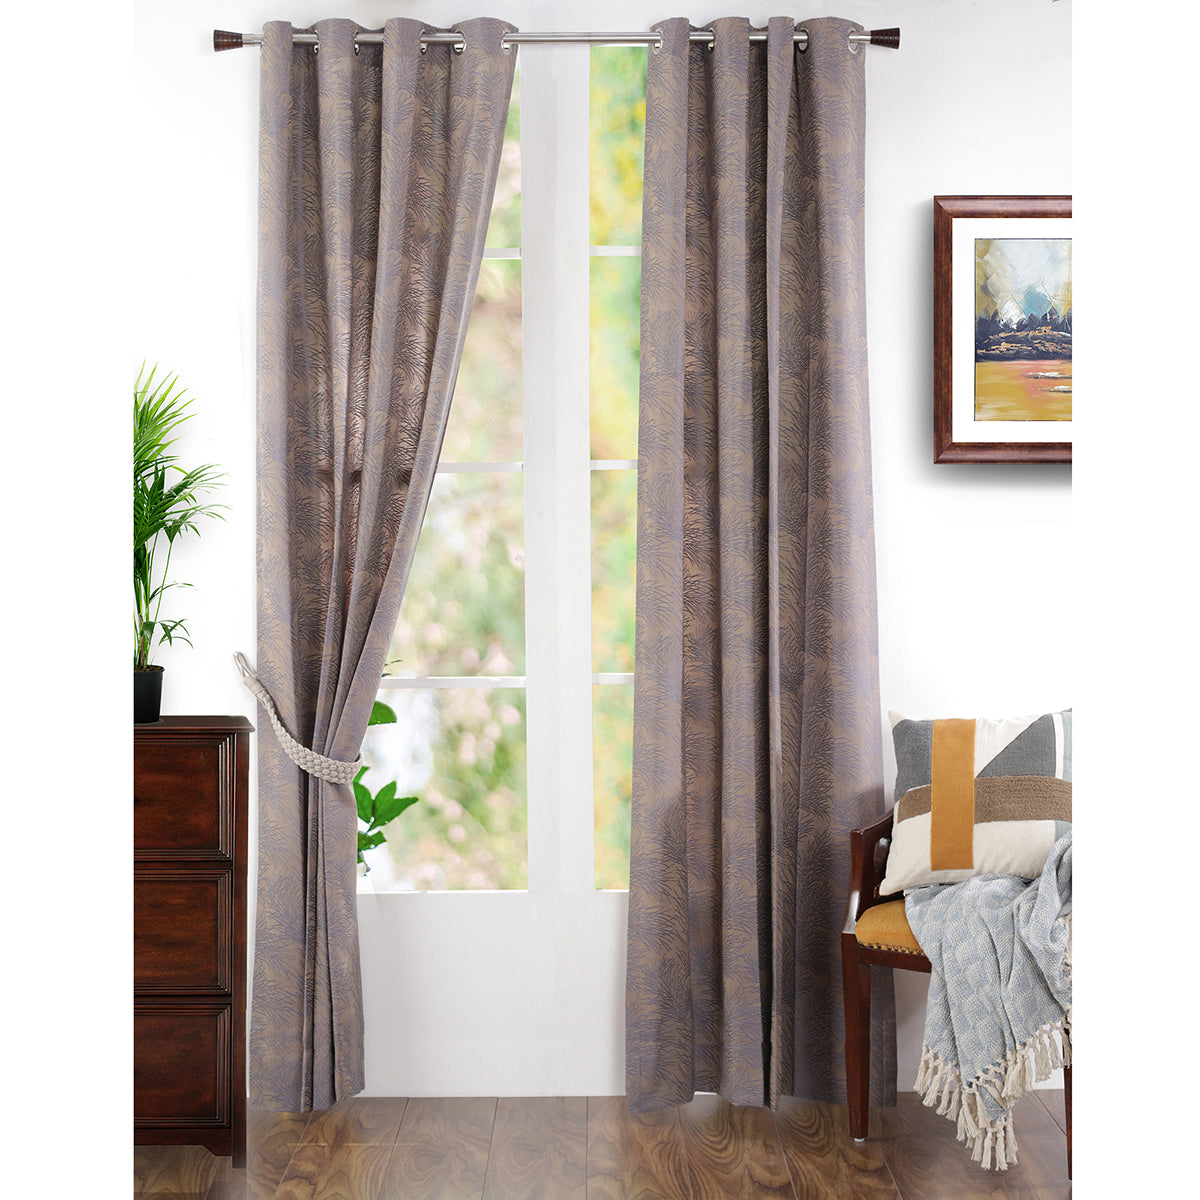 Cacti Spine J/Q Woven Yard Dyed Curtain Set